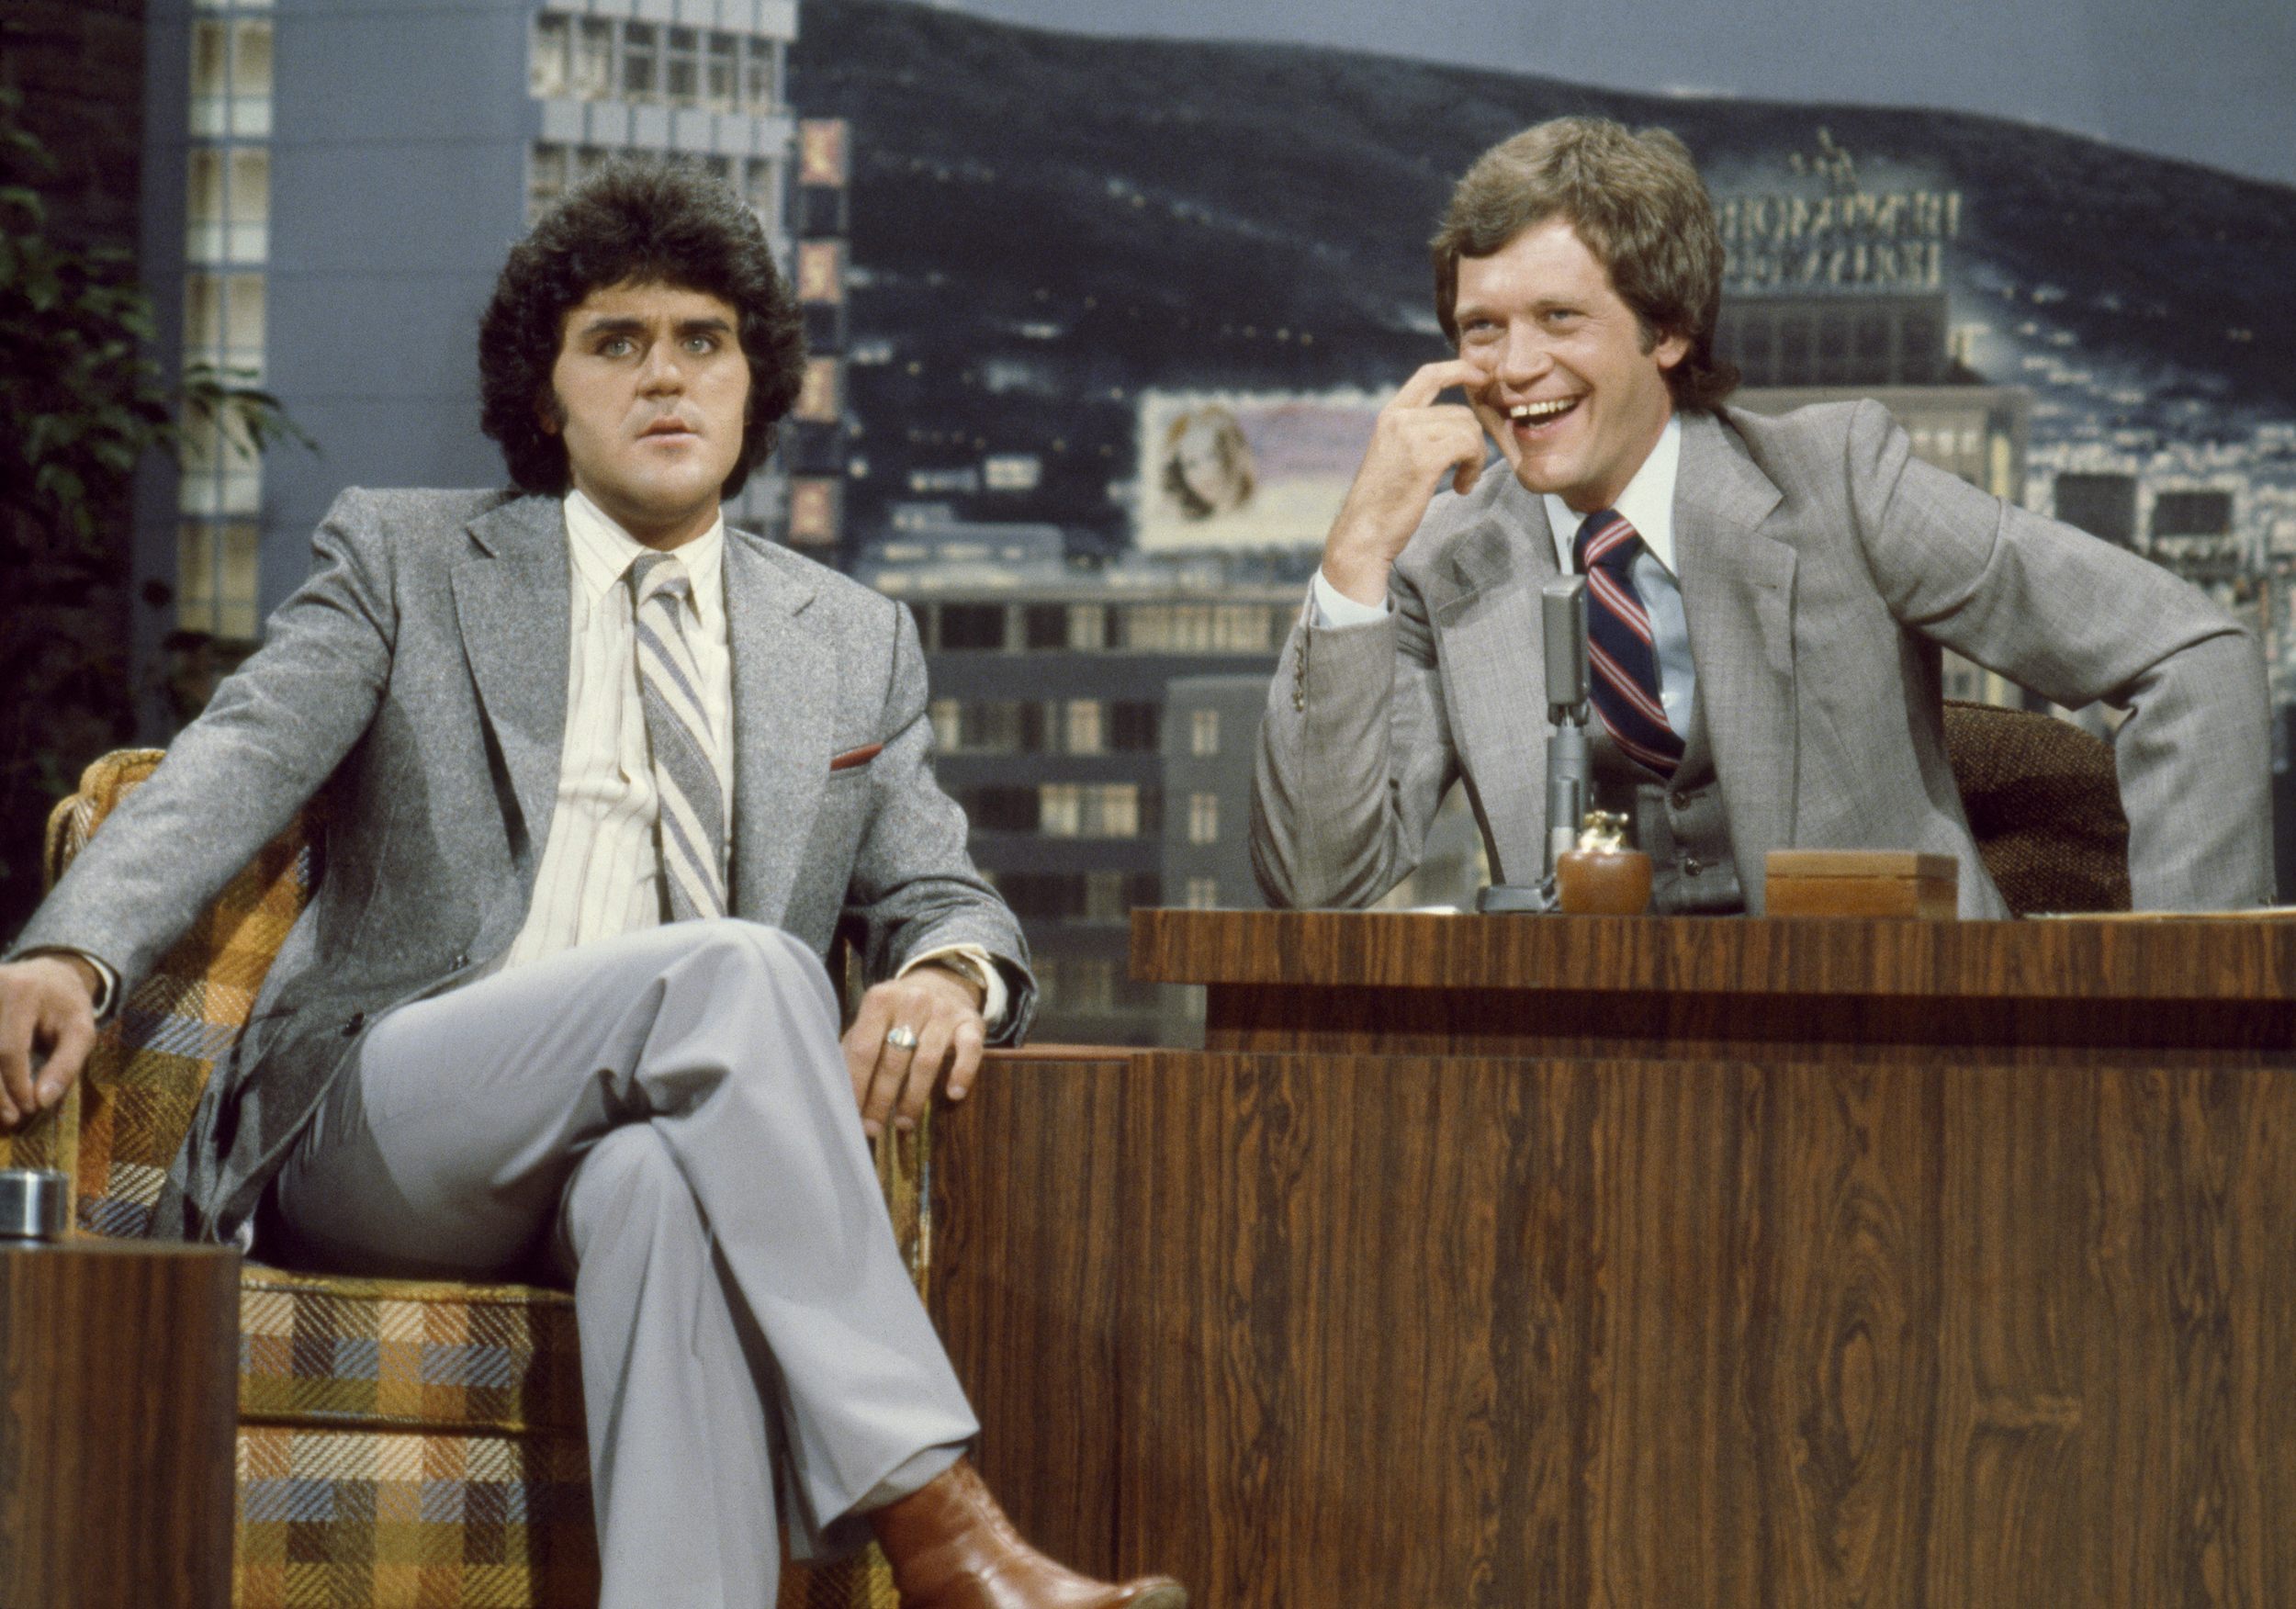 Letterman on Carson interviewing Leno